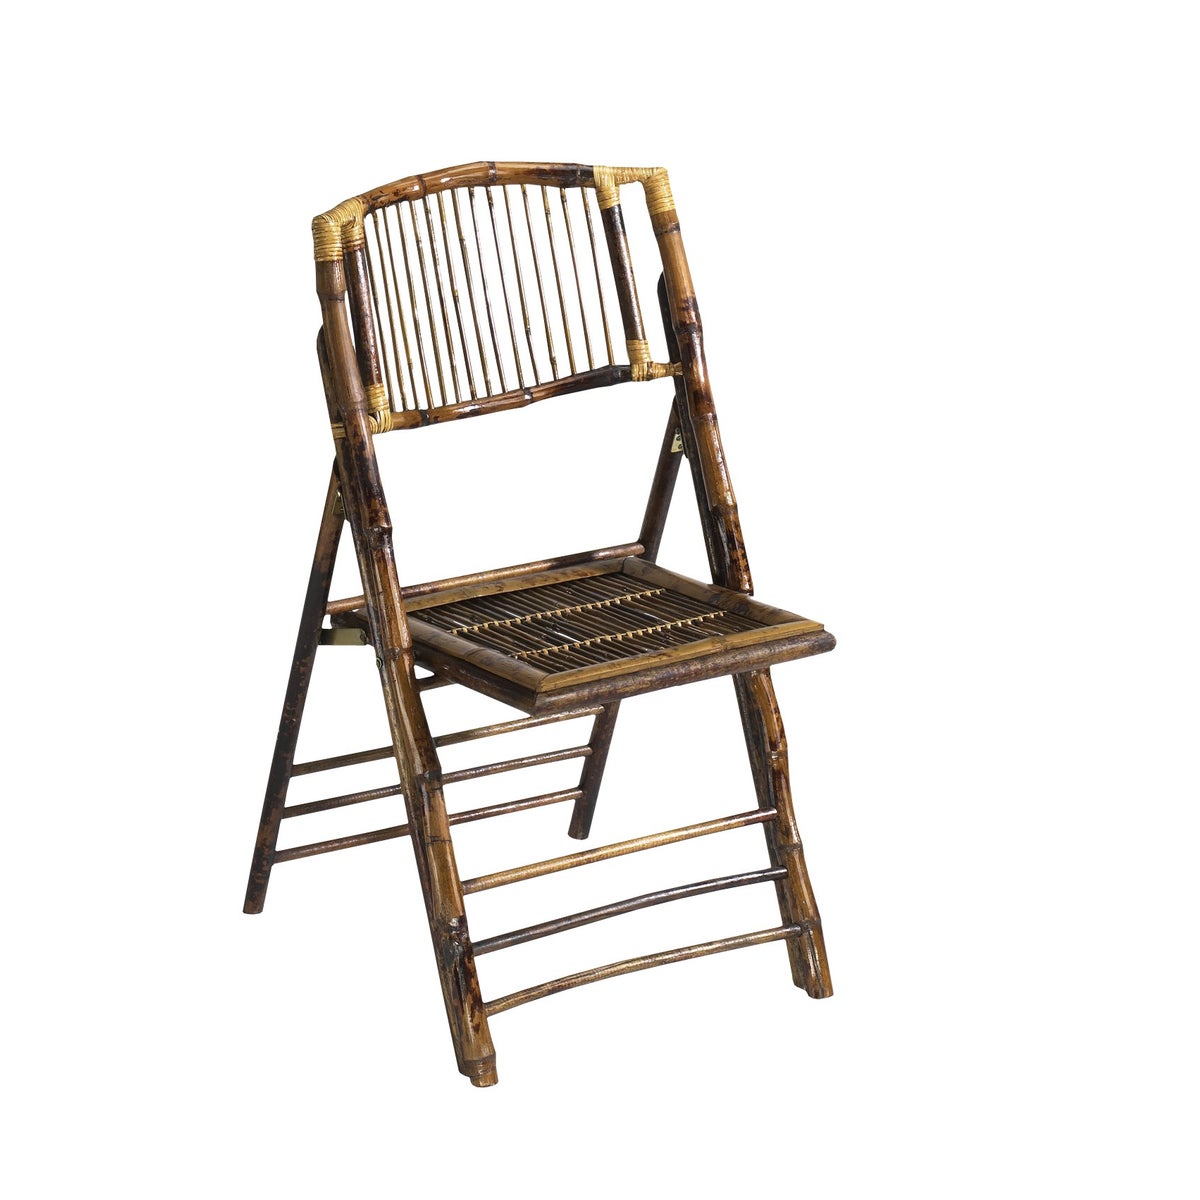 Folding Rattan Chair  Frame Color - Tortoise Gloss             Sold as a 4 pack ONLY